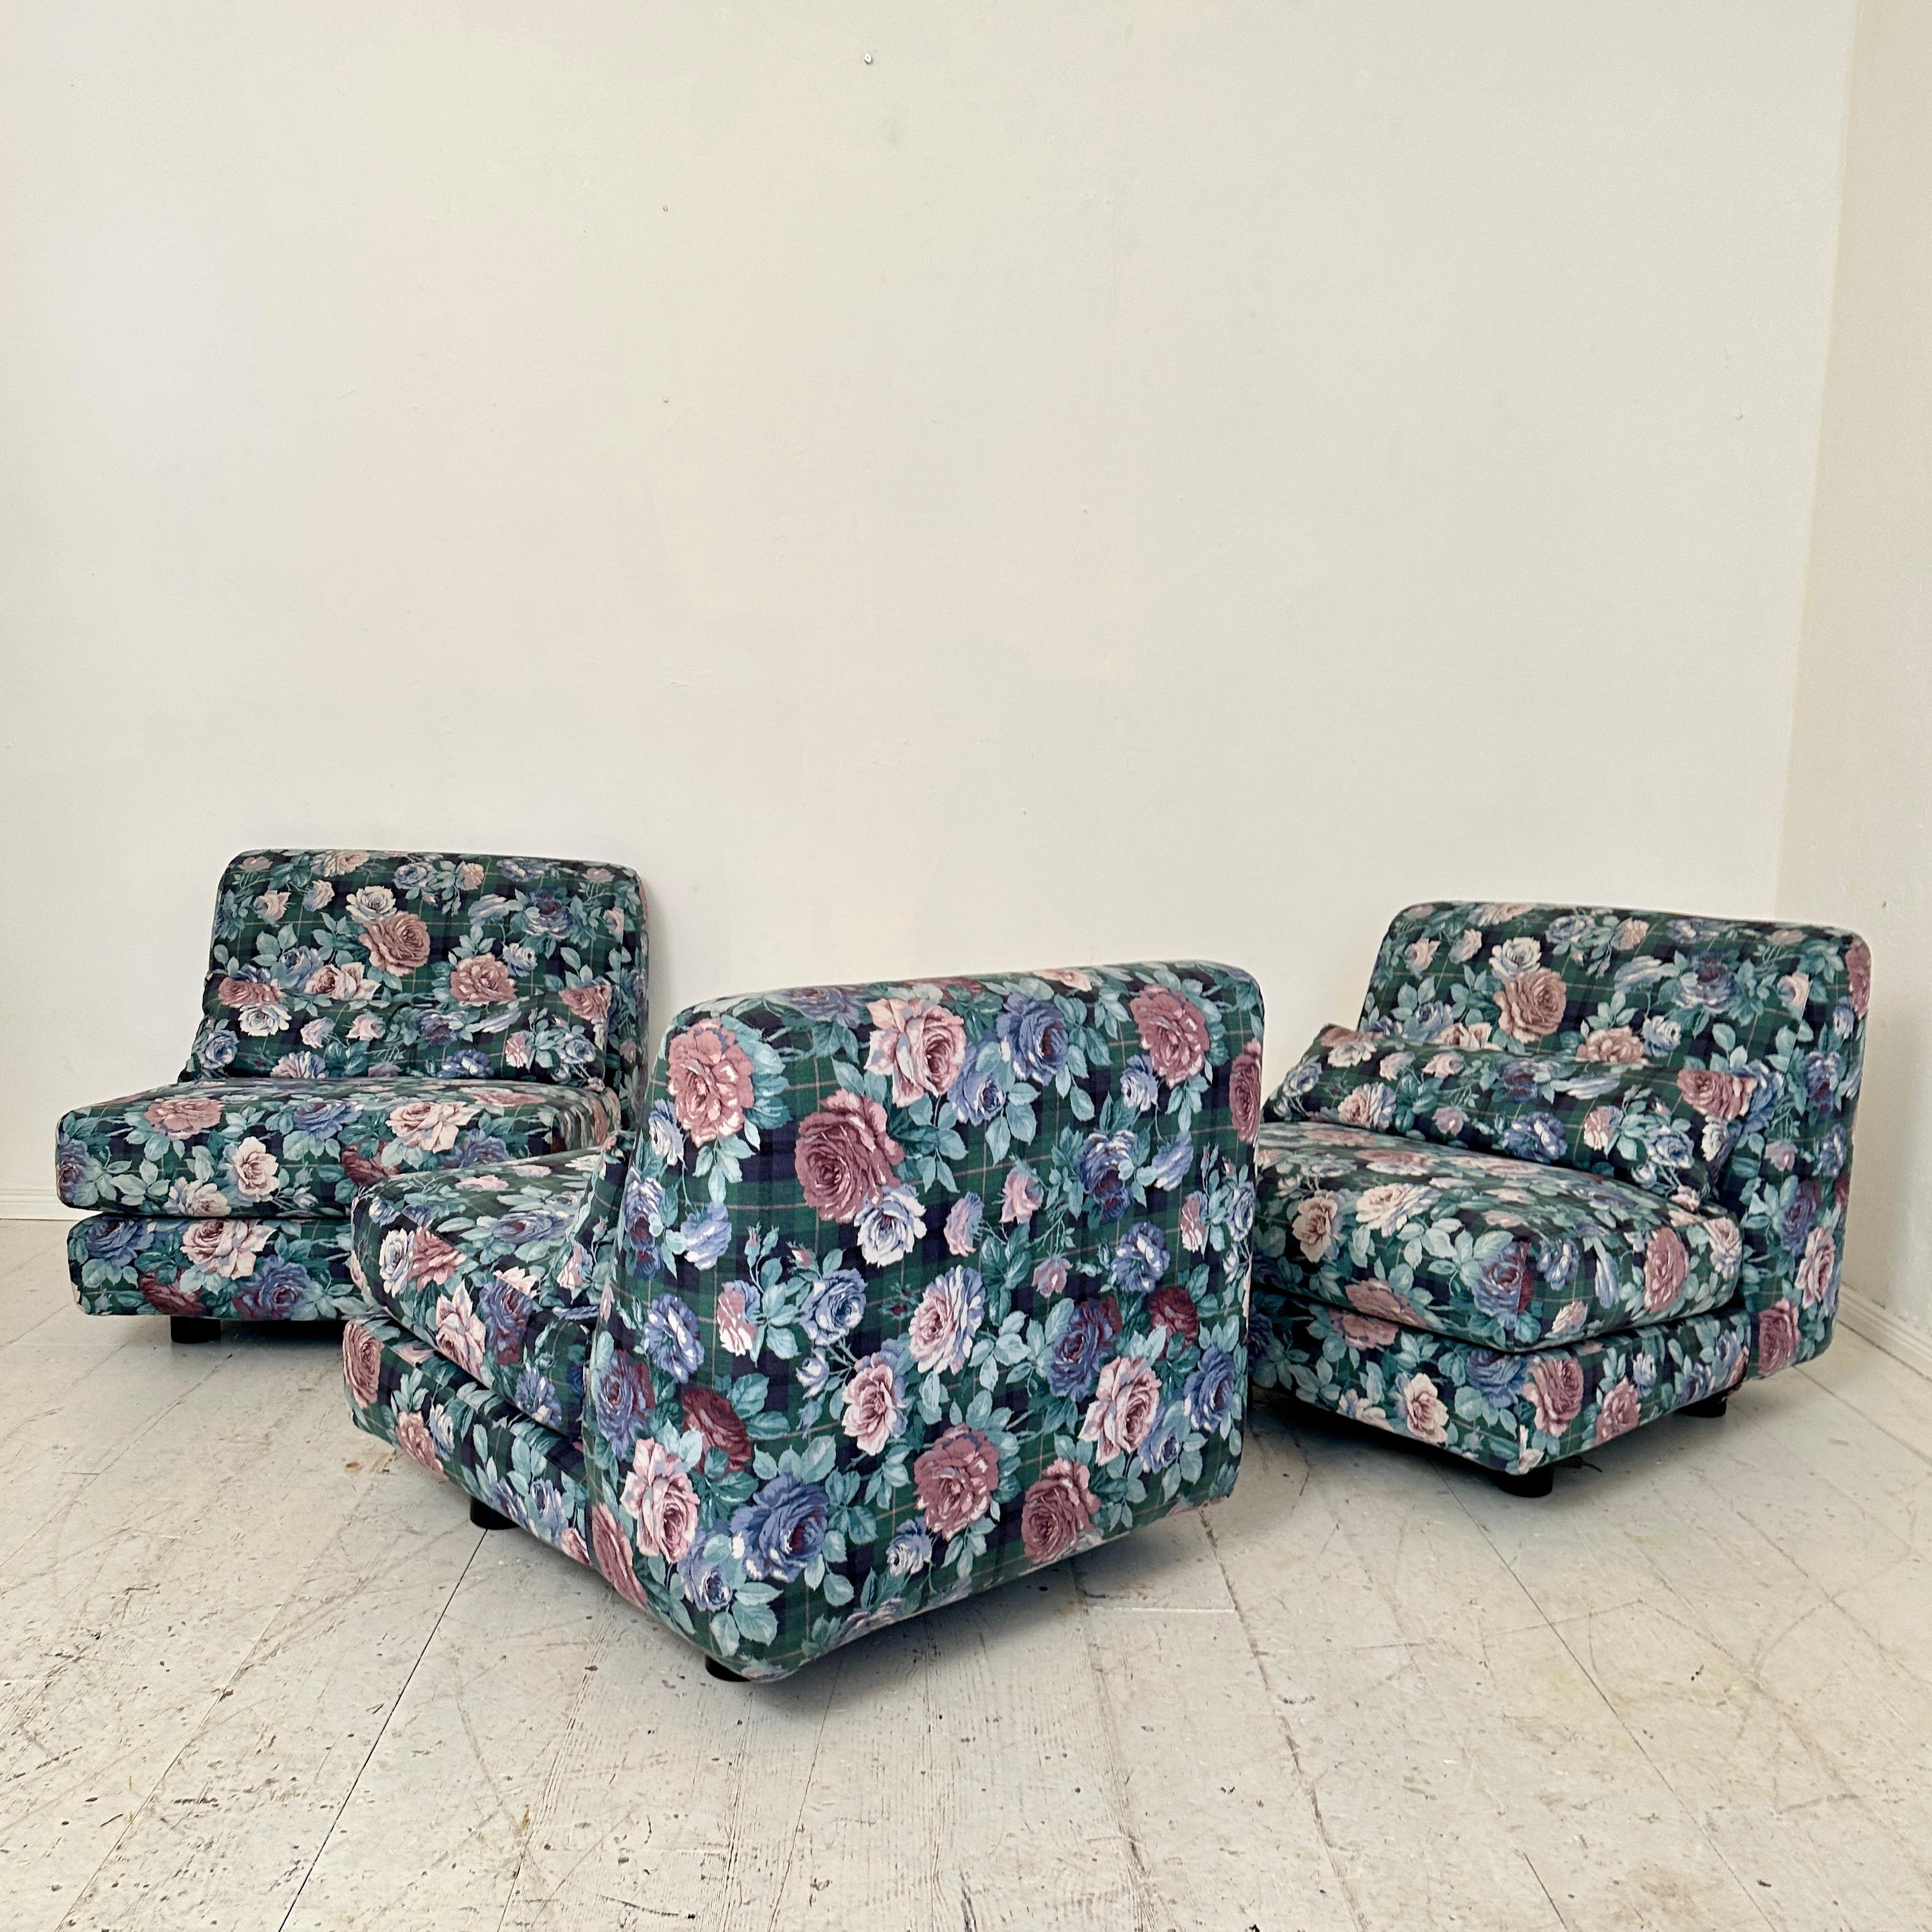 Mid Century Italian Modular Sofa in 3 Pieces with a Flower Fabric, around 1970 For Sale 3